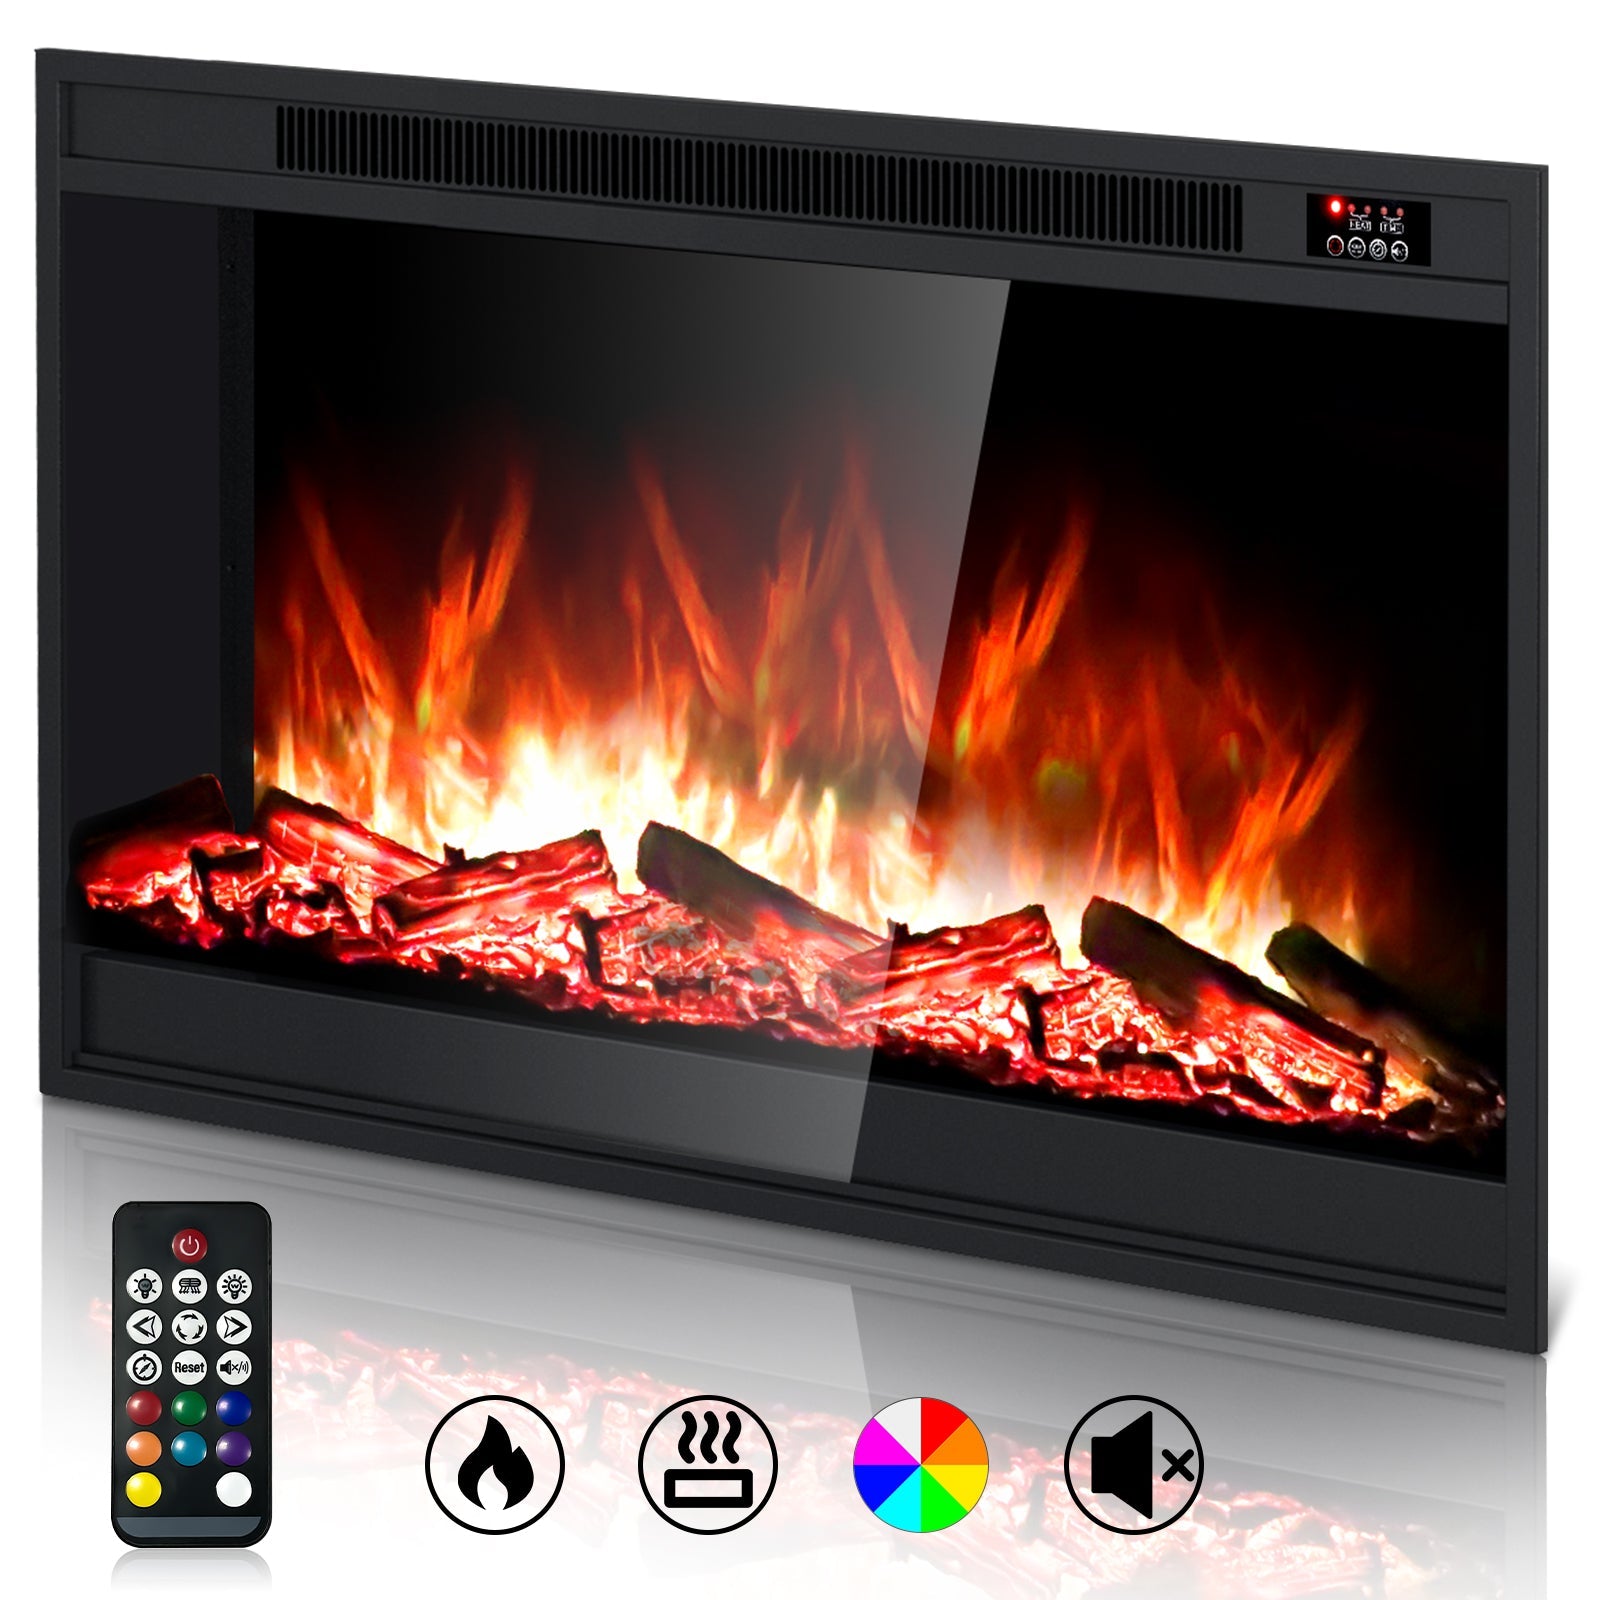 2.4G Remote Controller for HSA, HSW and HSQ Series Electric Fireplace(coin cell battery included)